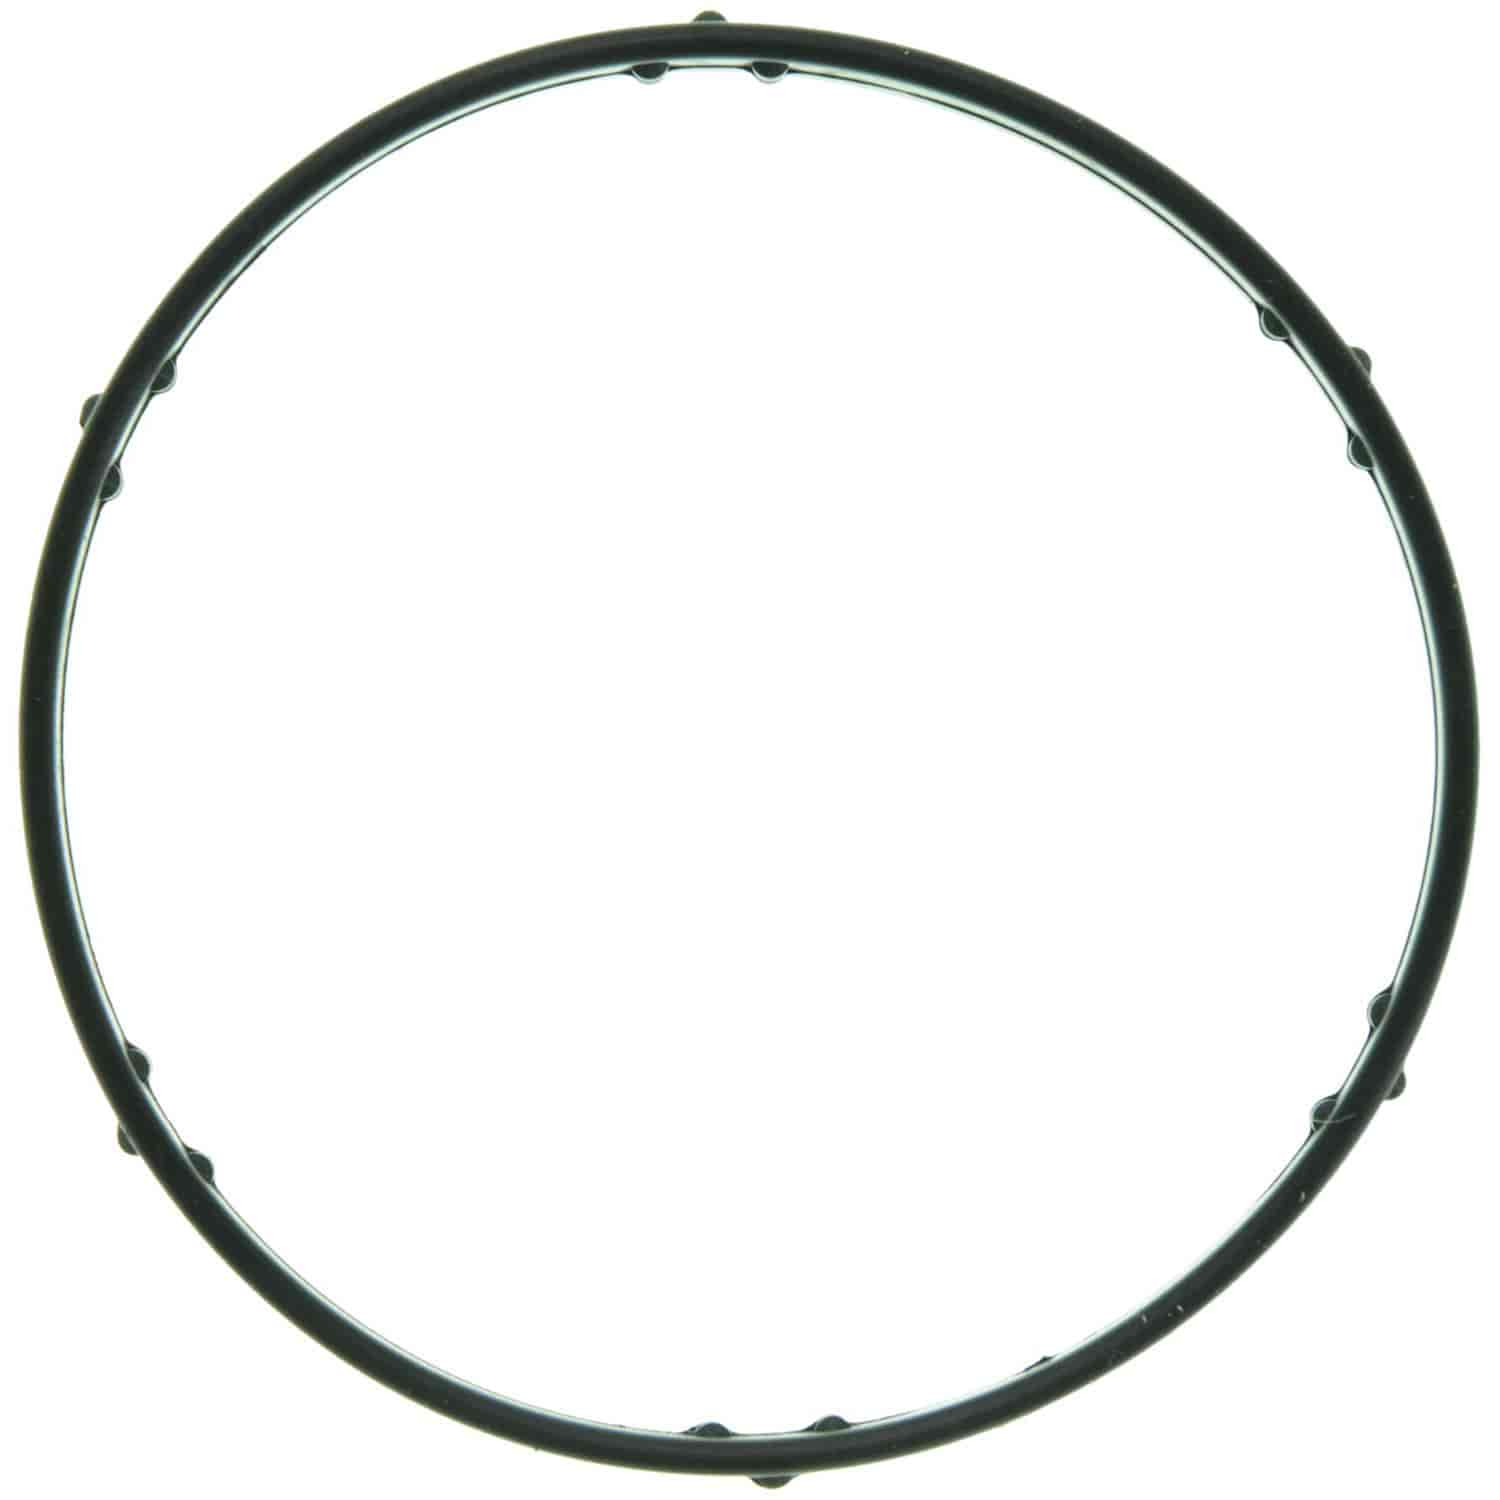 Water Outlet Gasket FORD 3.9L DOHC 00-06 LS 02-05 THUNDERBIRD T-STAT HOUSING 69mm O-RING